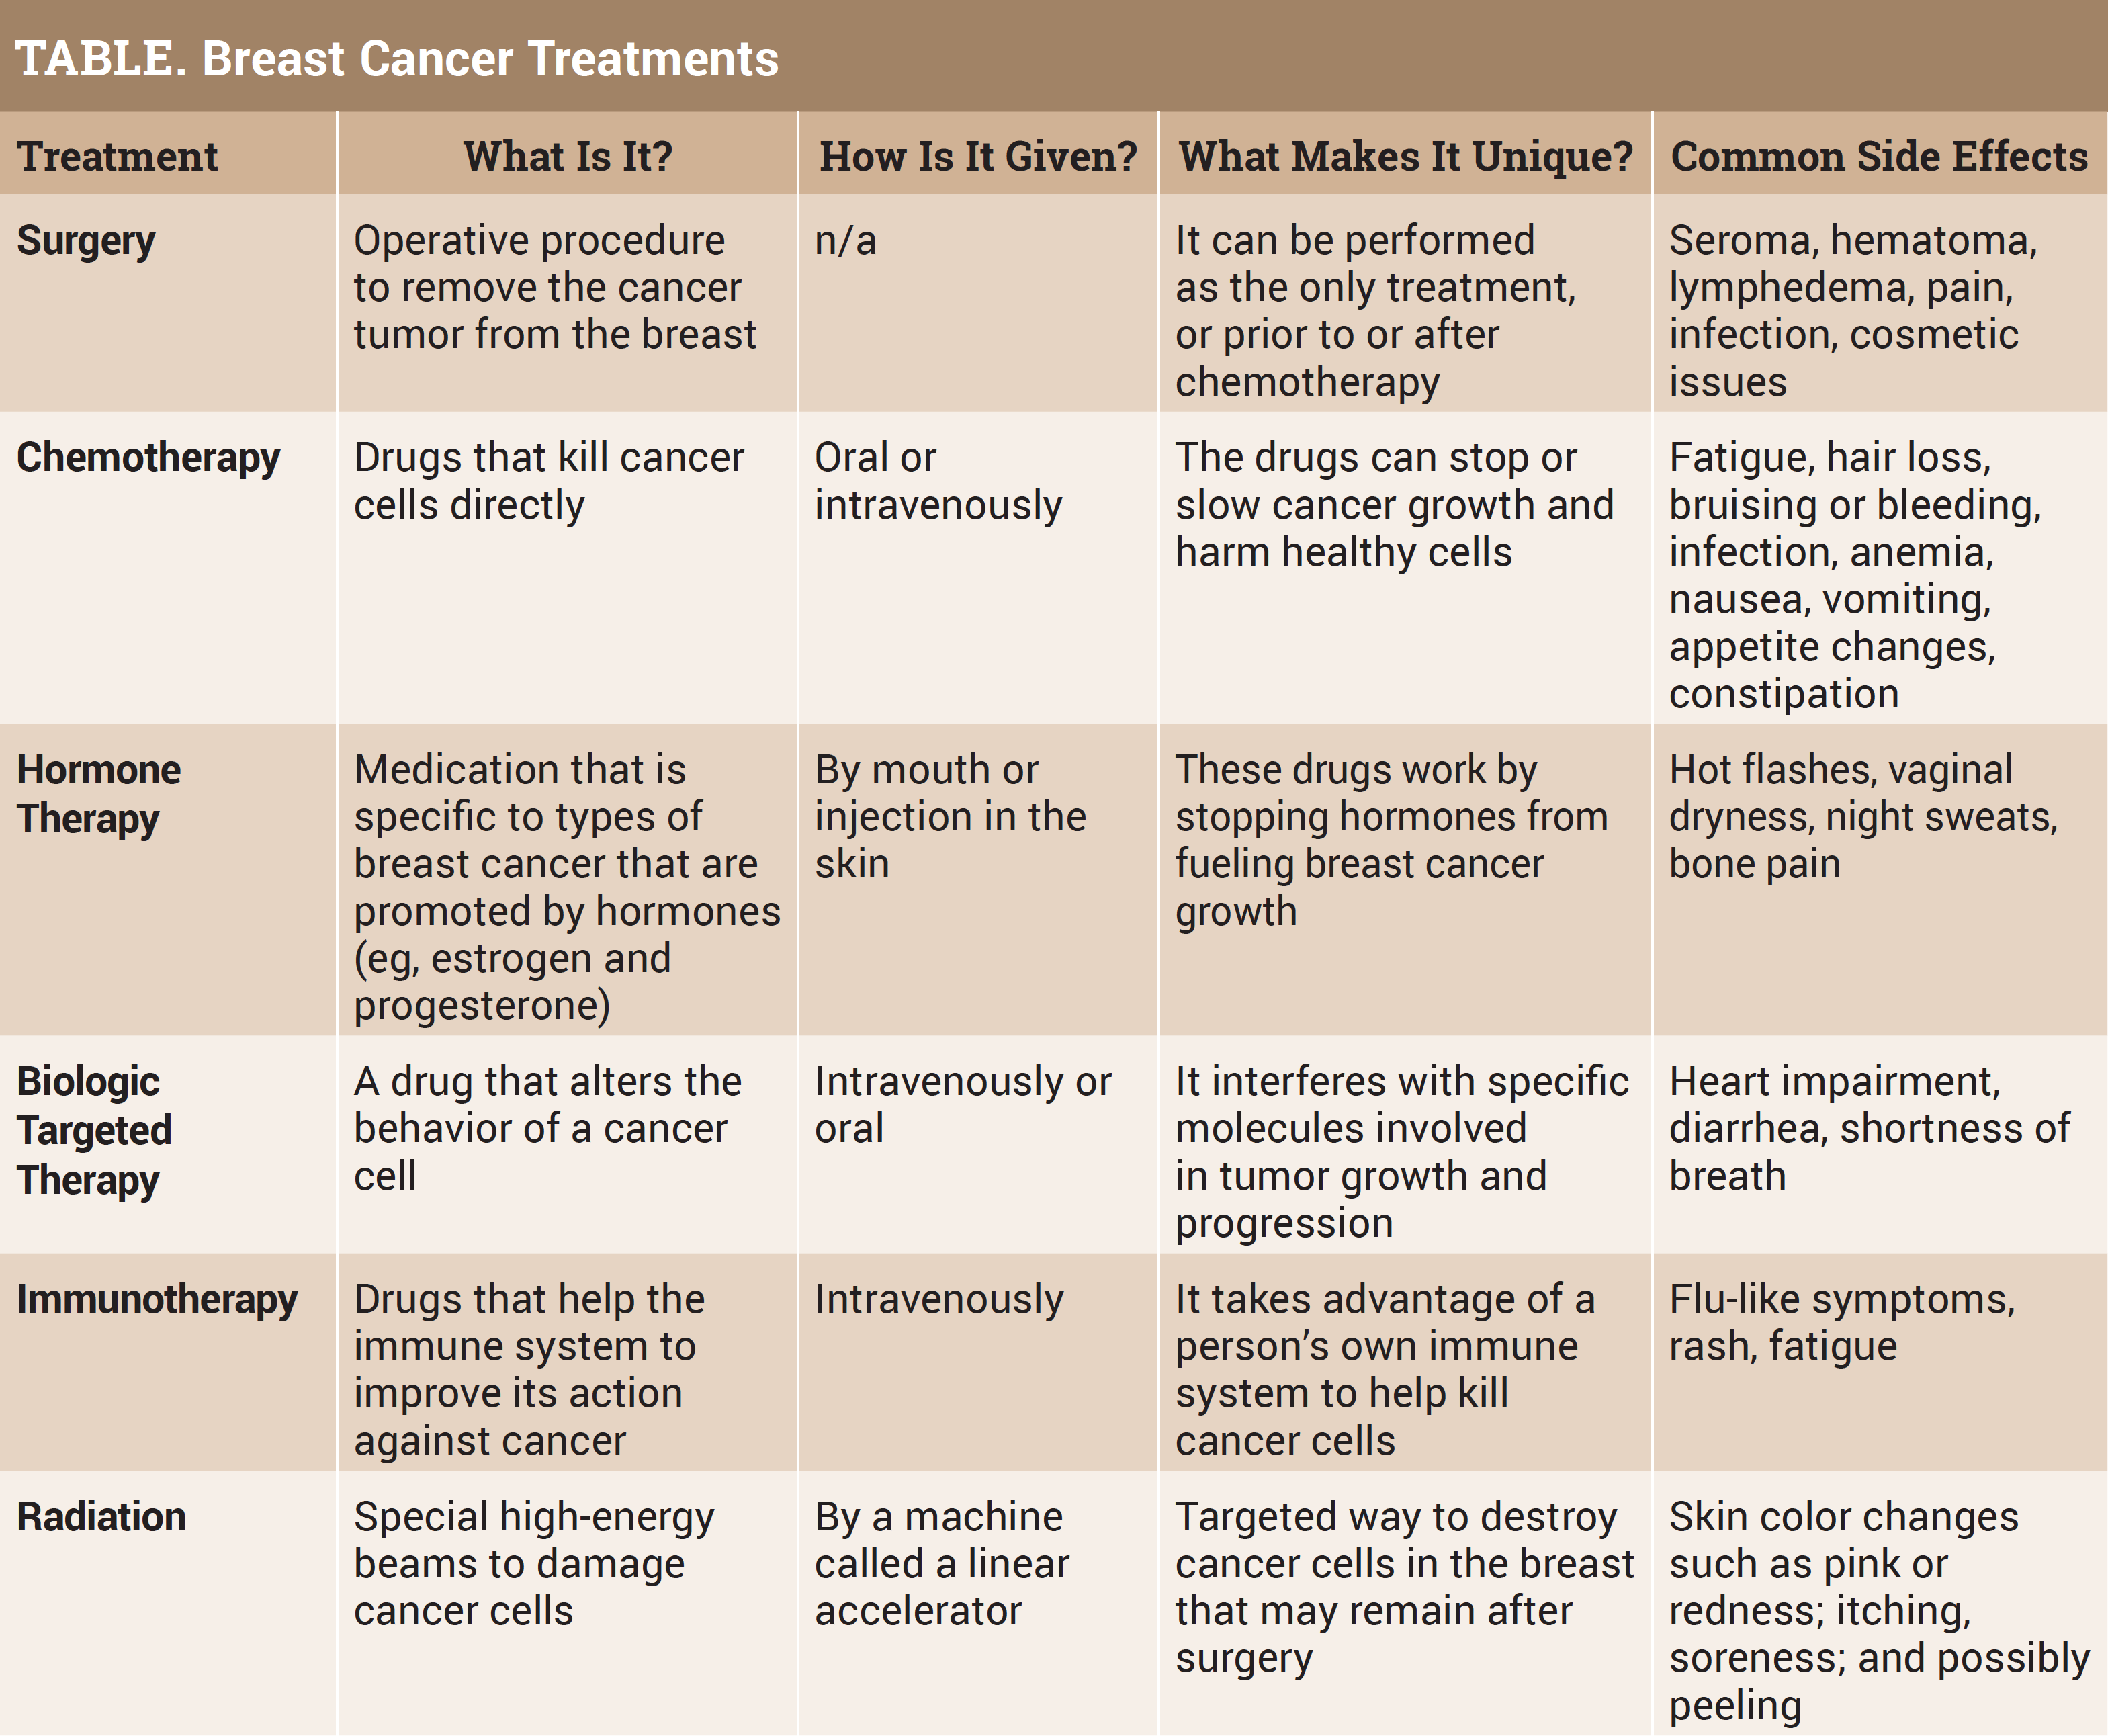 Lebanese Breast Cancer Foundation - Types of Breast Cancer